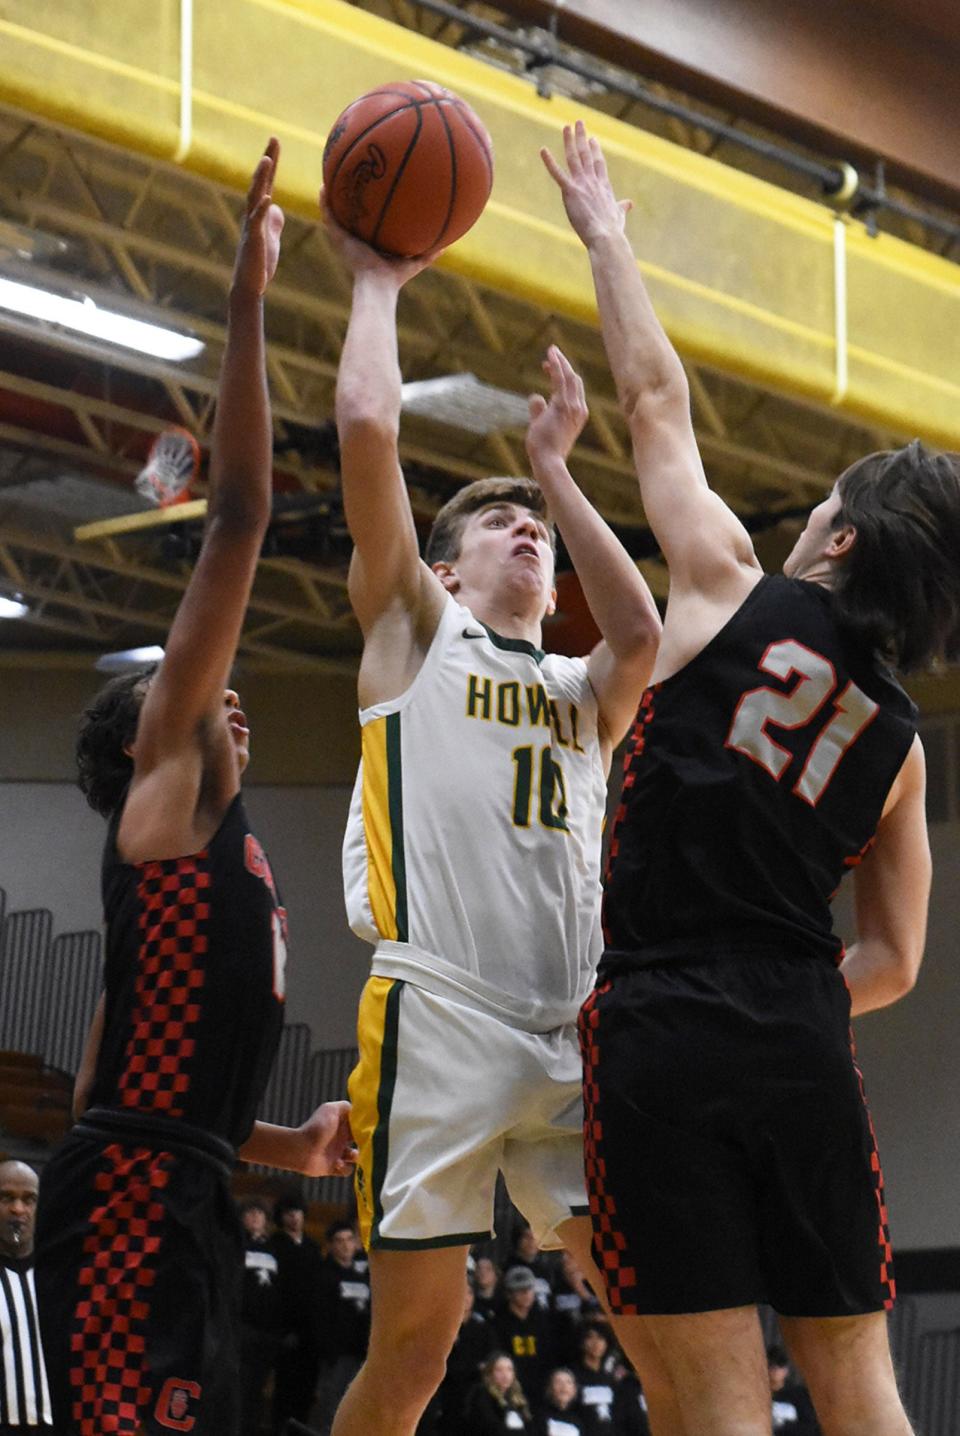 Howell's Andrew Weber scored a career-high 16 points in a 53-44 victory over Canton on Tuesday, Jan. 31, 2023.